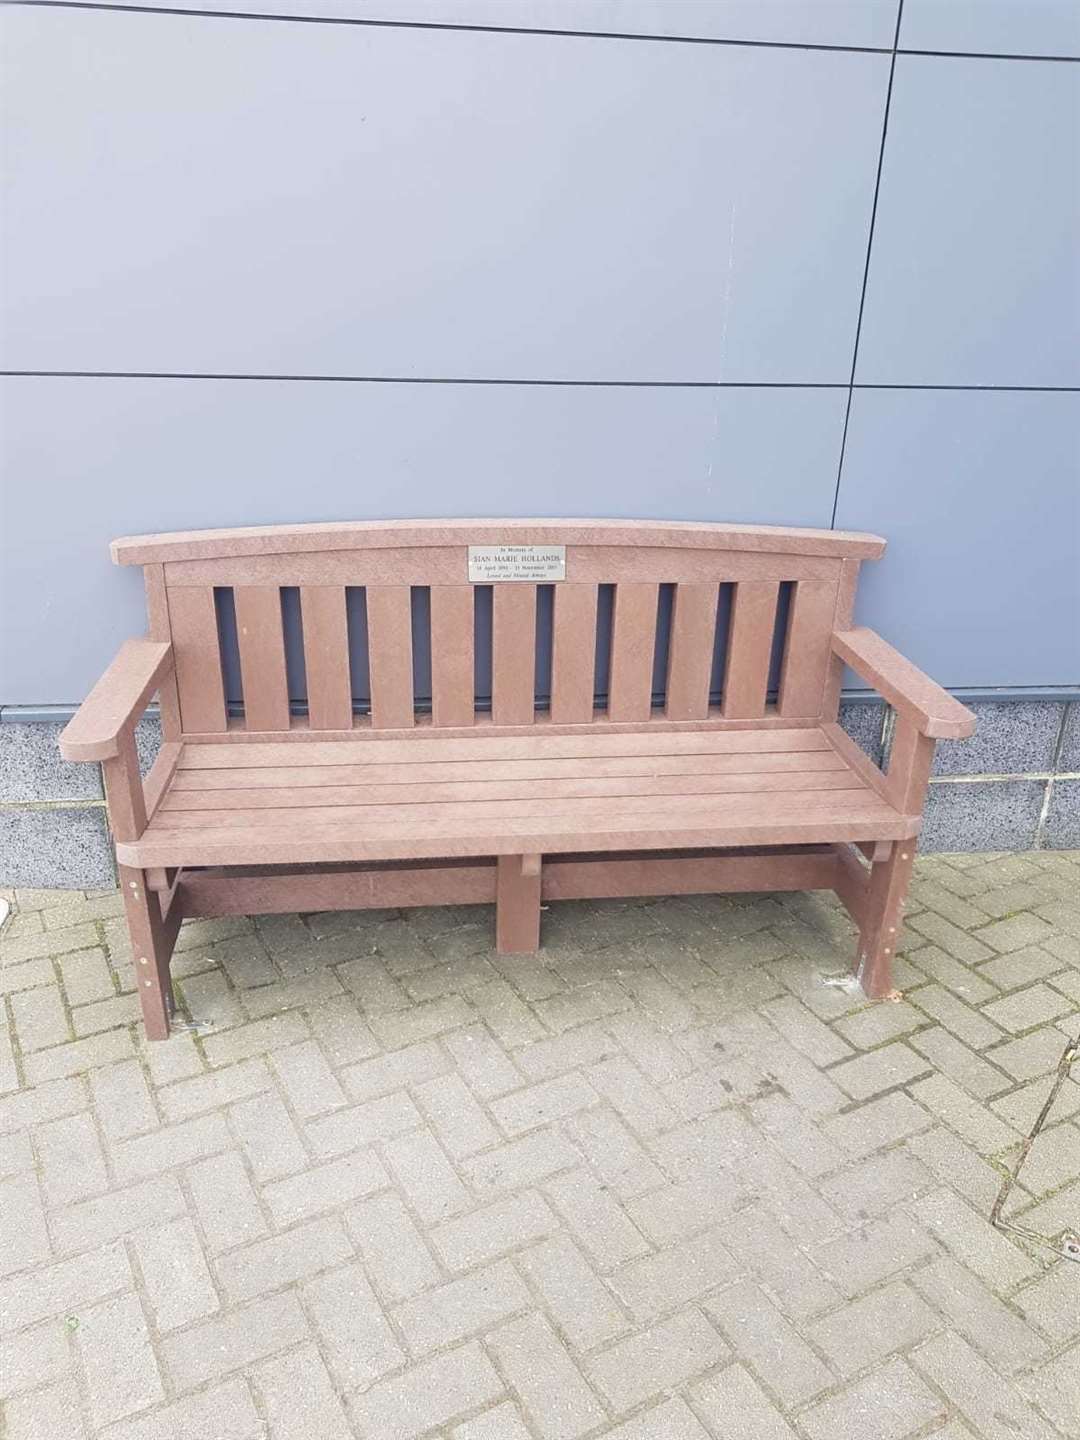 The bench installed outside of Darent Valley A&E in memory of Sian Hollands. Picture: Nicola Smith